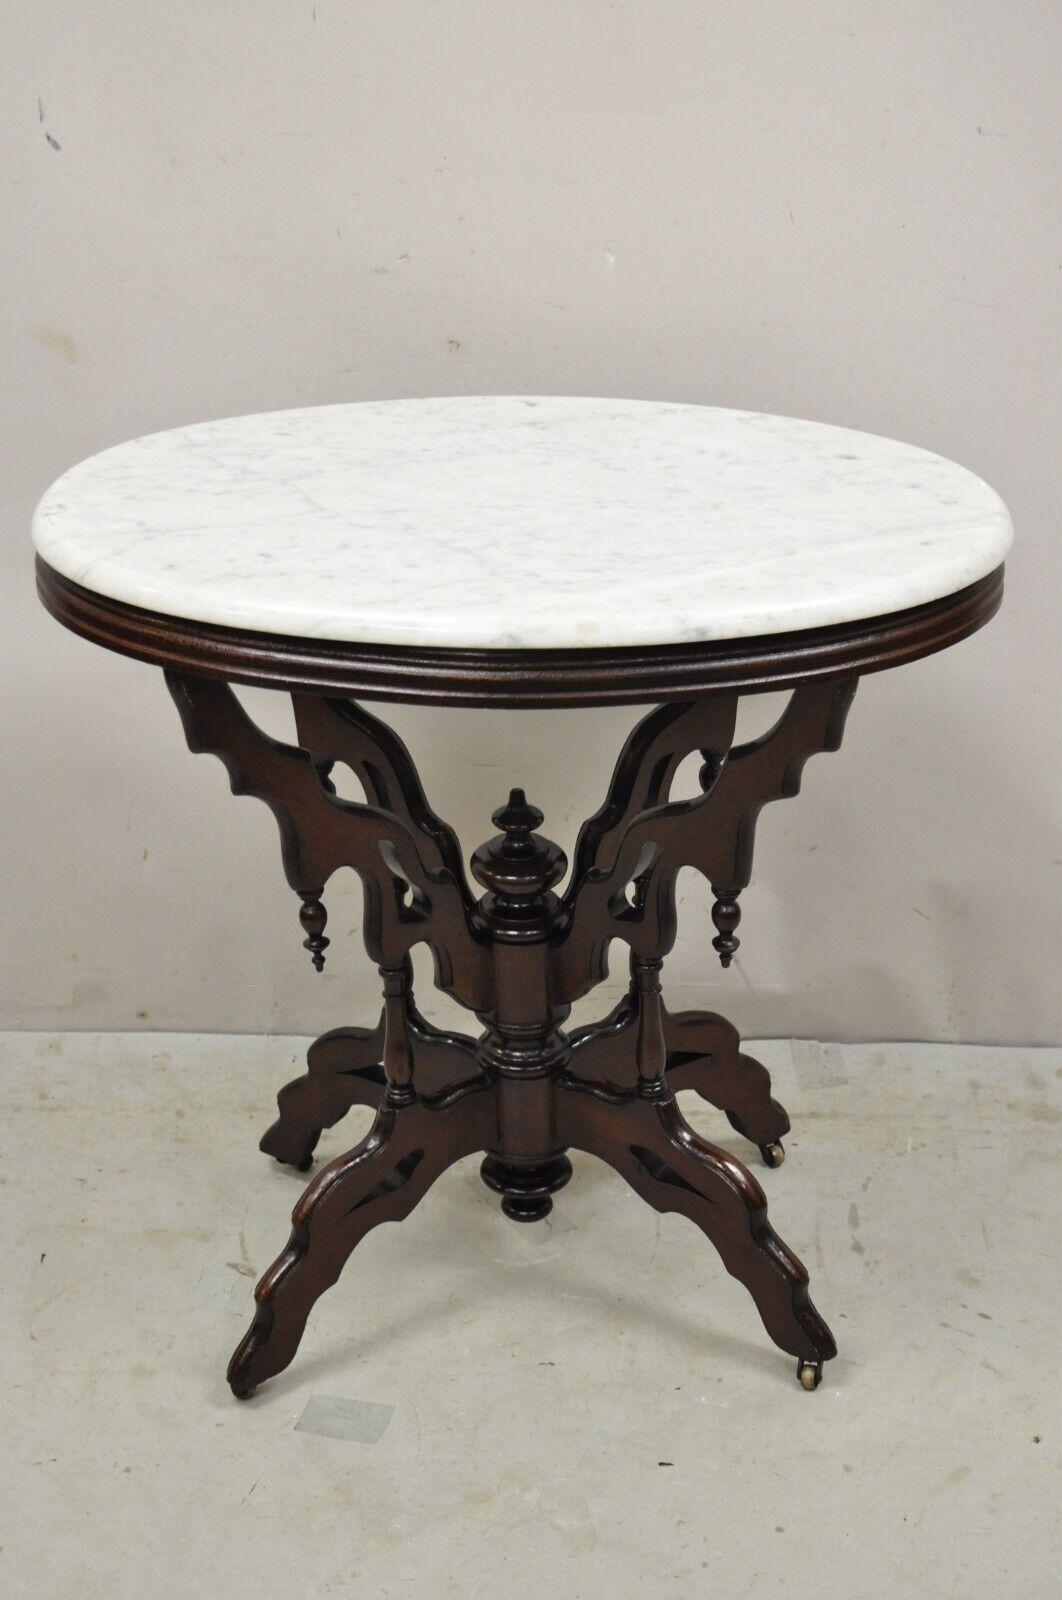 Antique Eastlake Victorian Walnut Oval Marble Top Parlor Lamp Table. Circa 19th Century. Measurements: 28.5